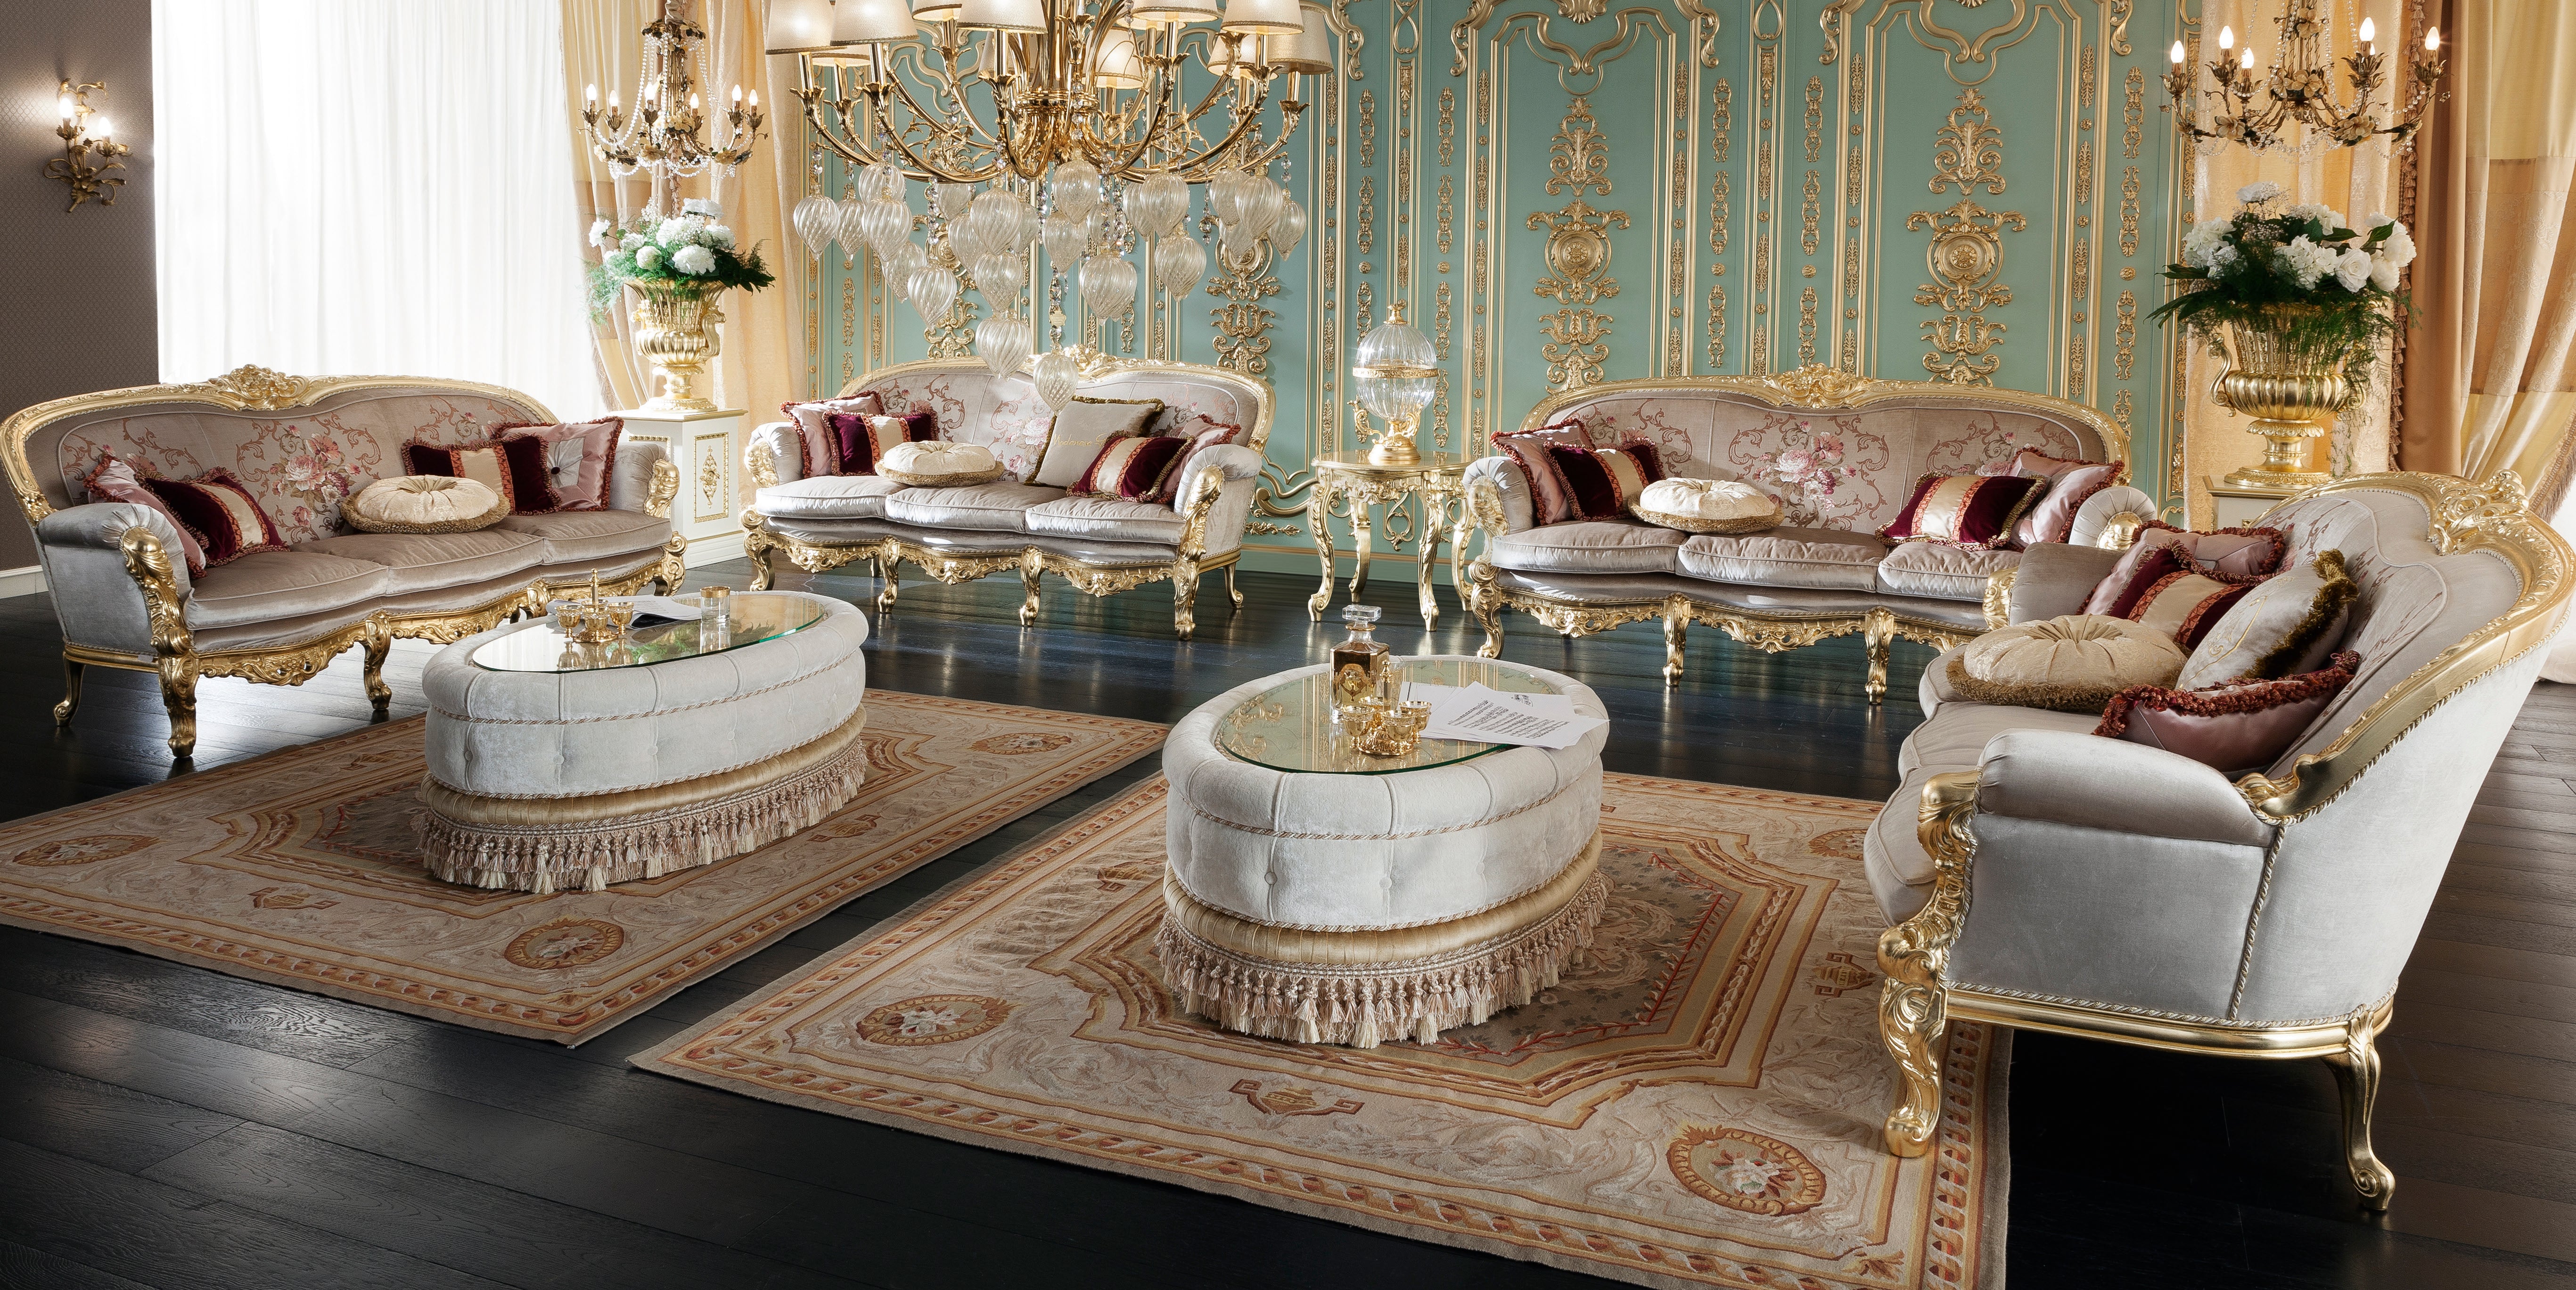 Luxury Italian Furniture: The Perfect Blend of Style and Comfort